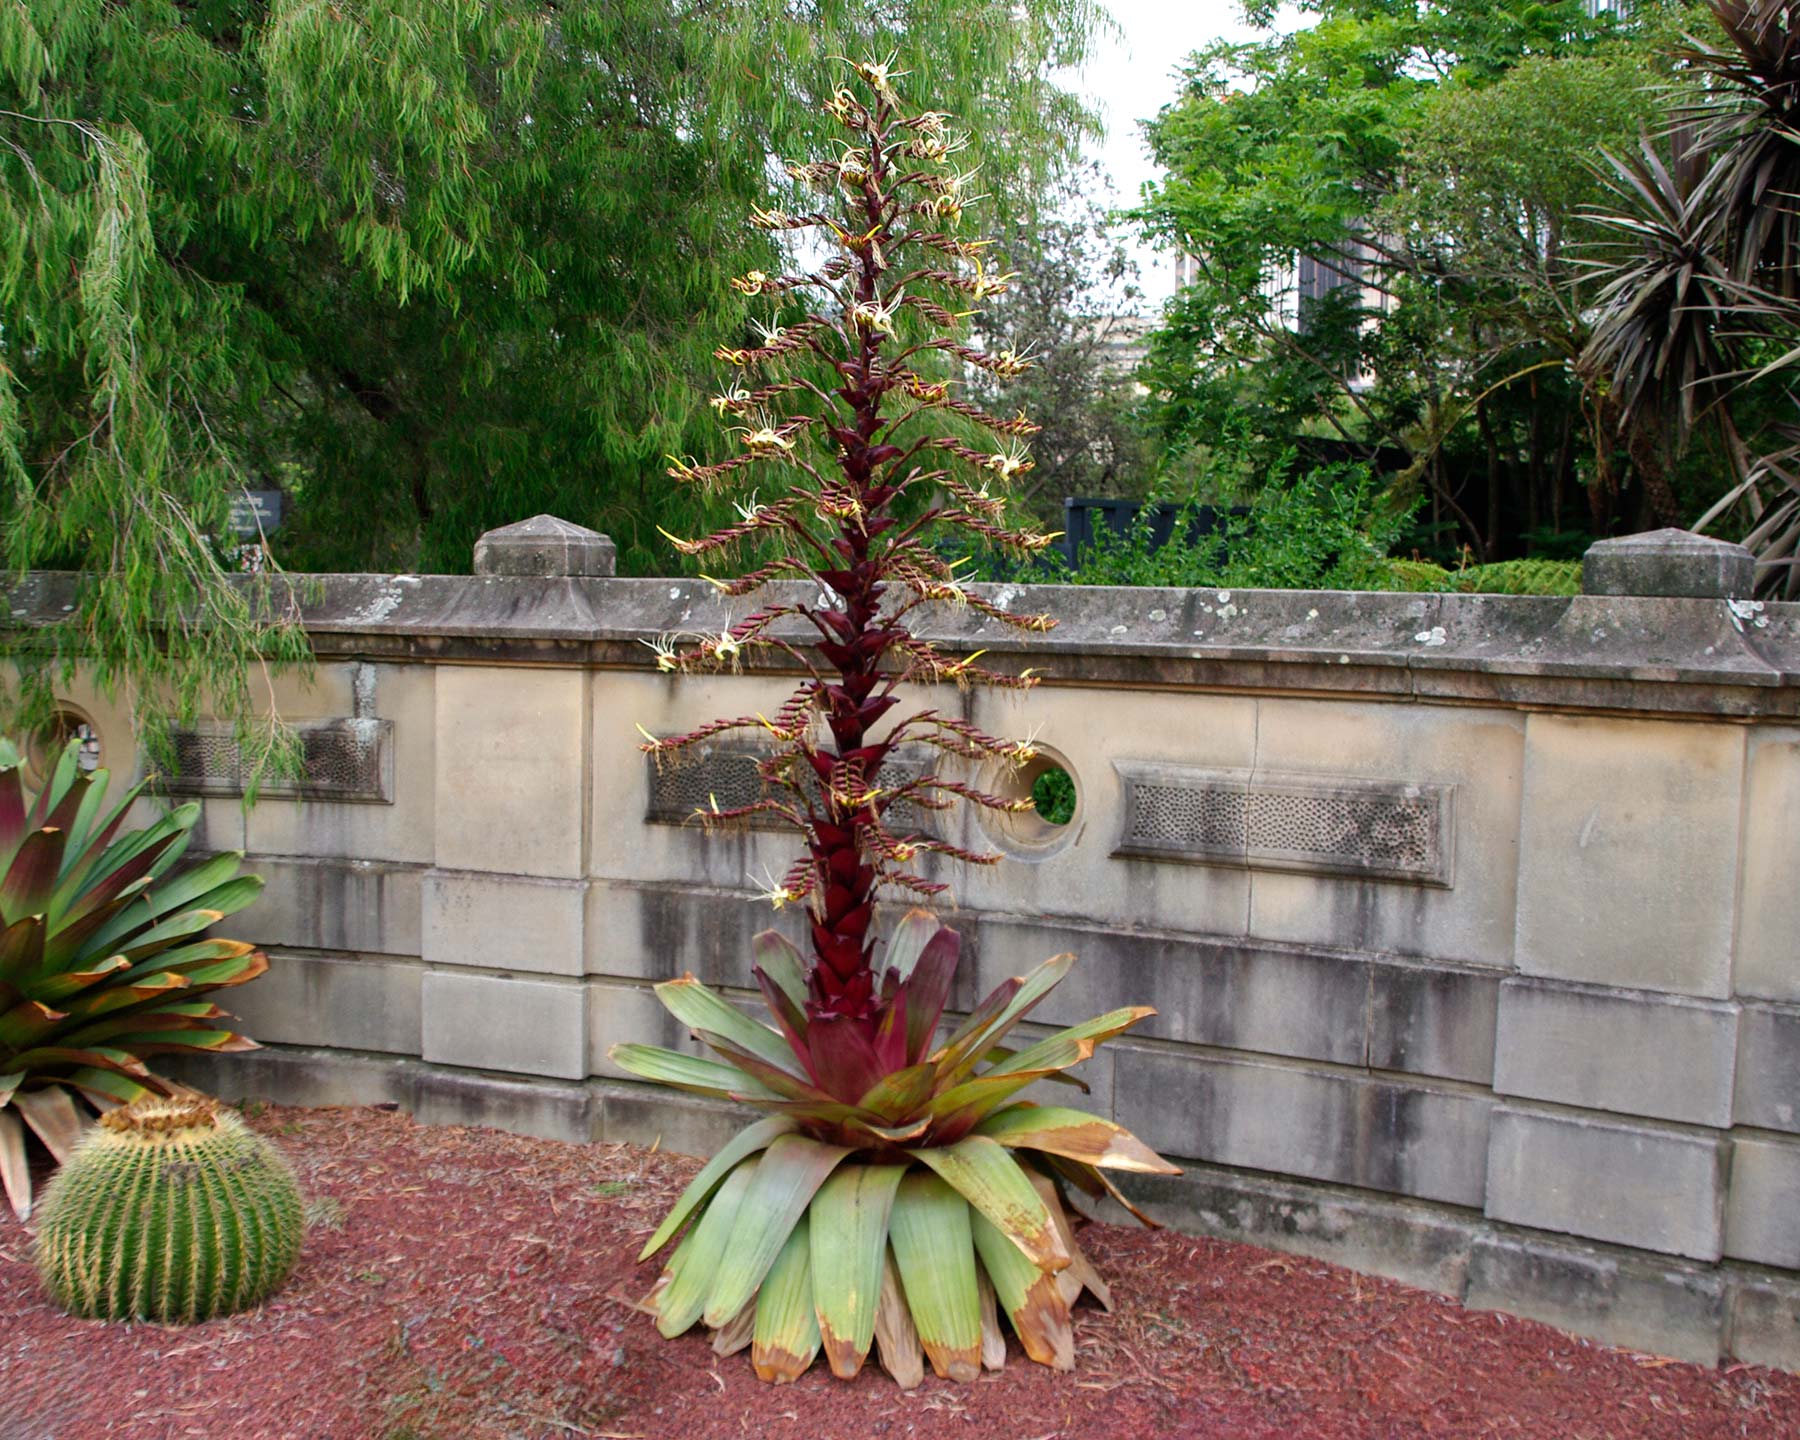 Alcantarea imperialis Rubra - red flower spike and bracts - white flowers